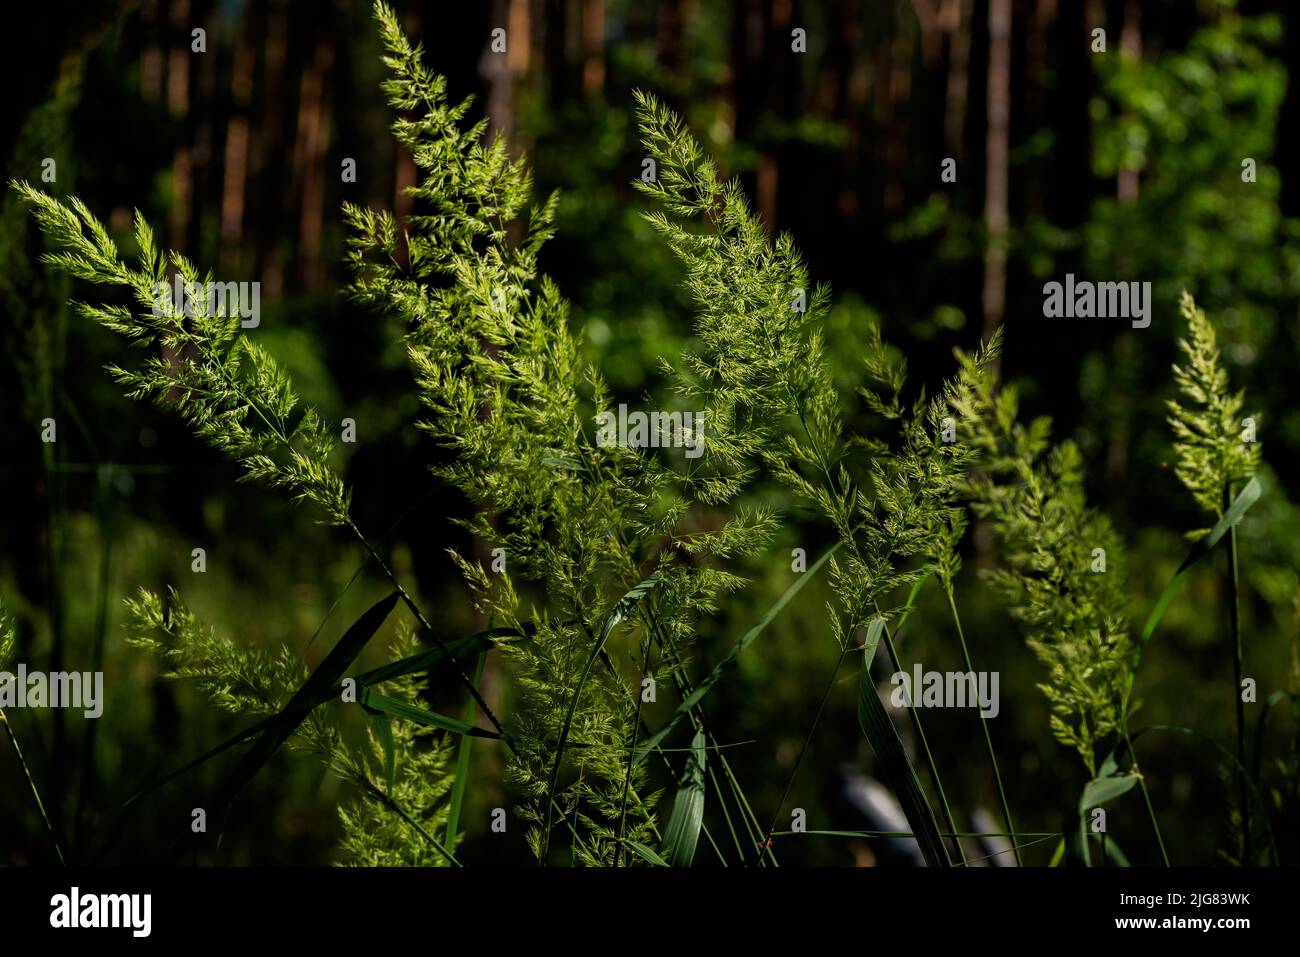 Freshly grown wild grass in summer in a forest Stock Photo